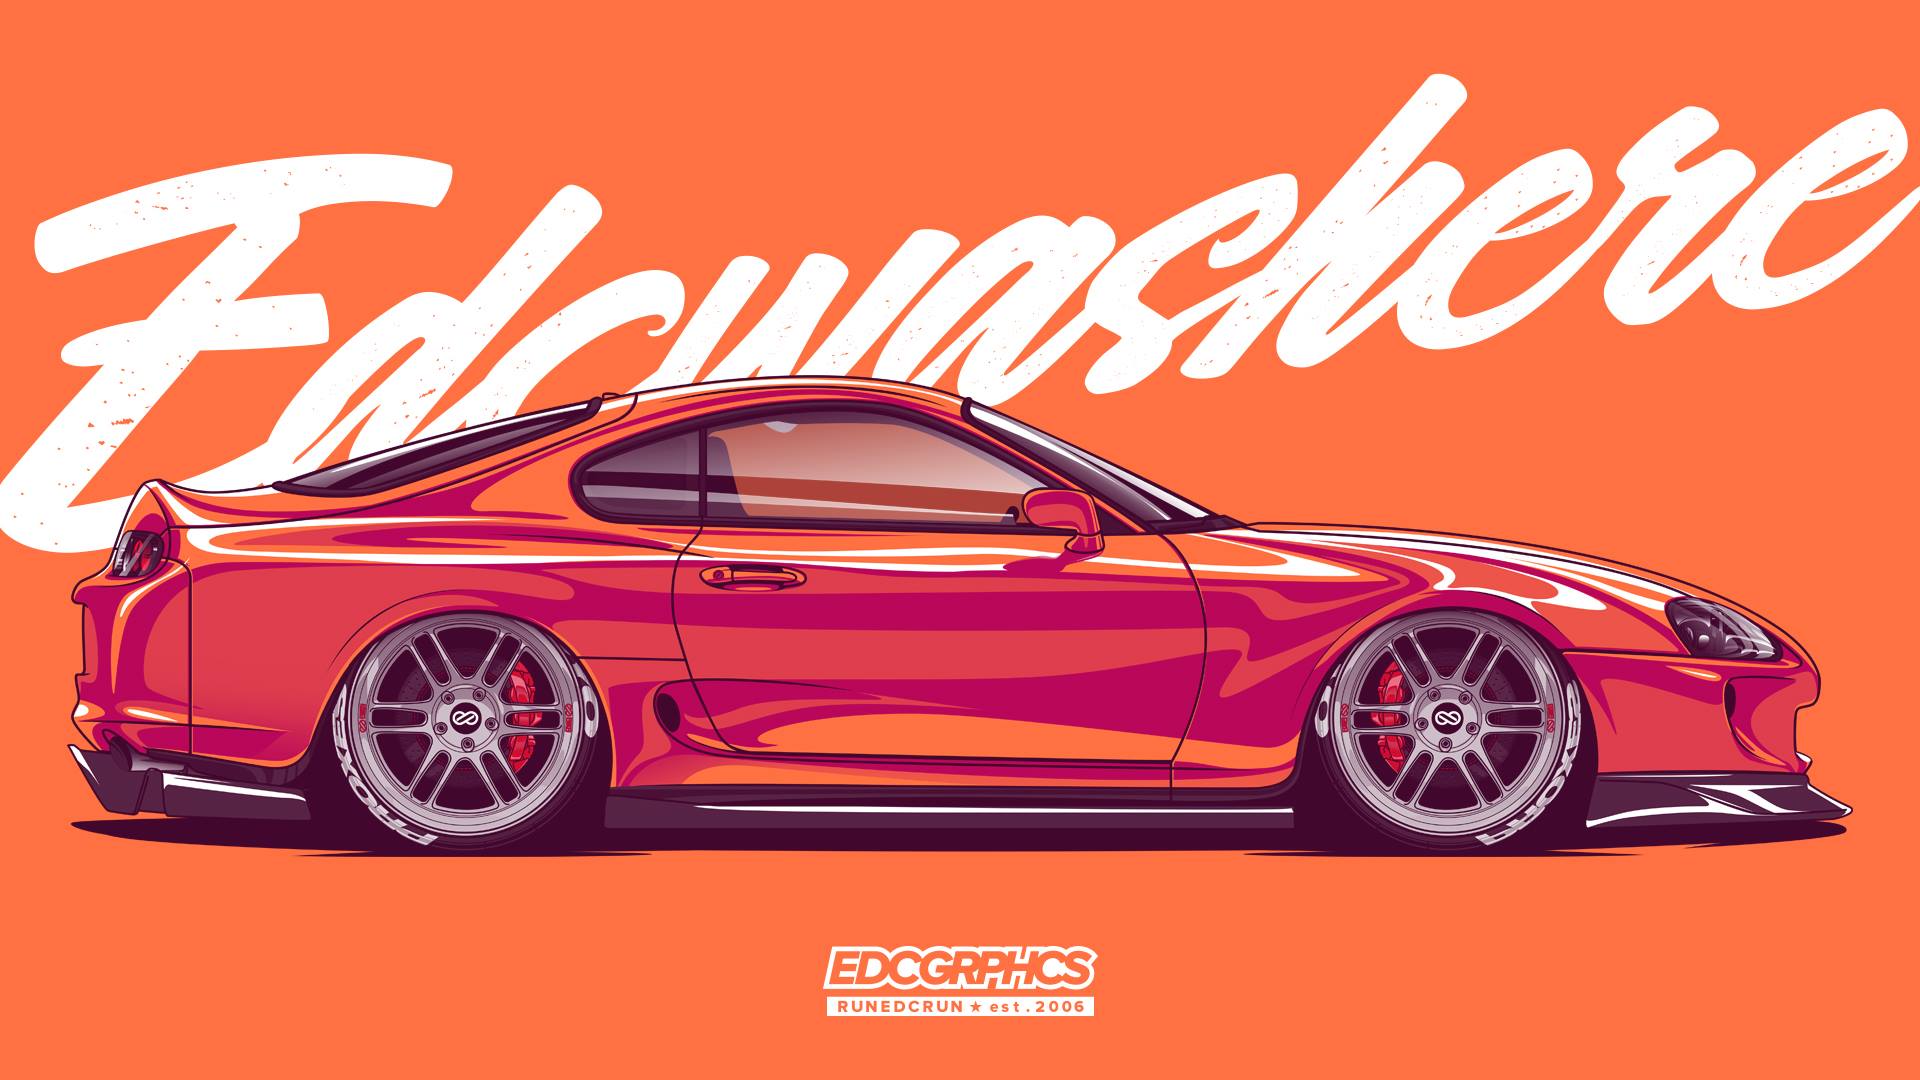 General 1920x1080 EDC Graphics Toyota Supra Toyota Japanese cars side view CGI digital art watermarked text simple background